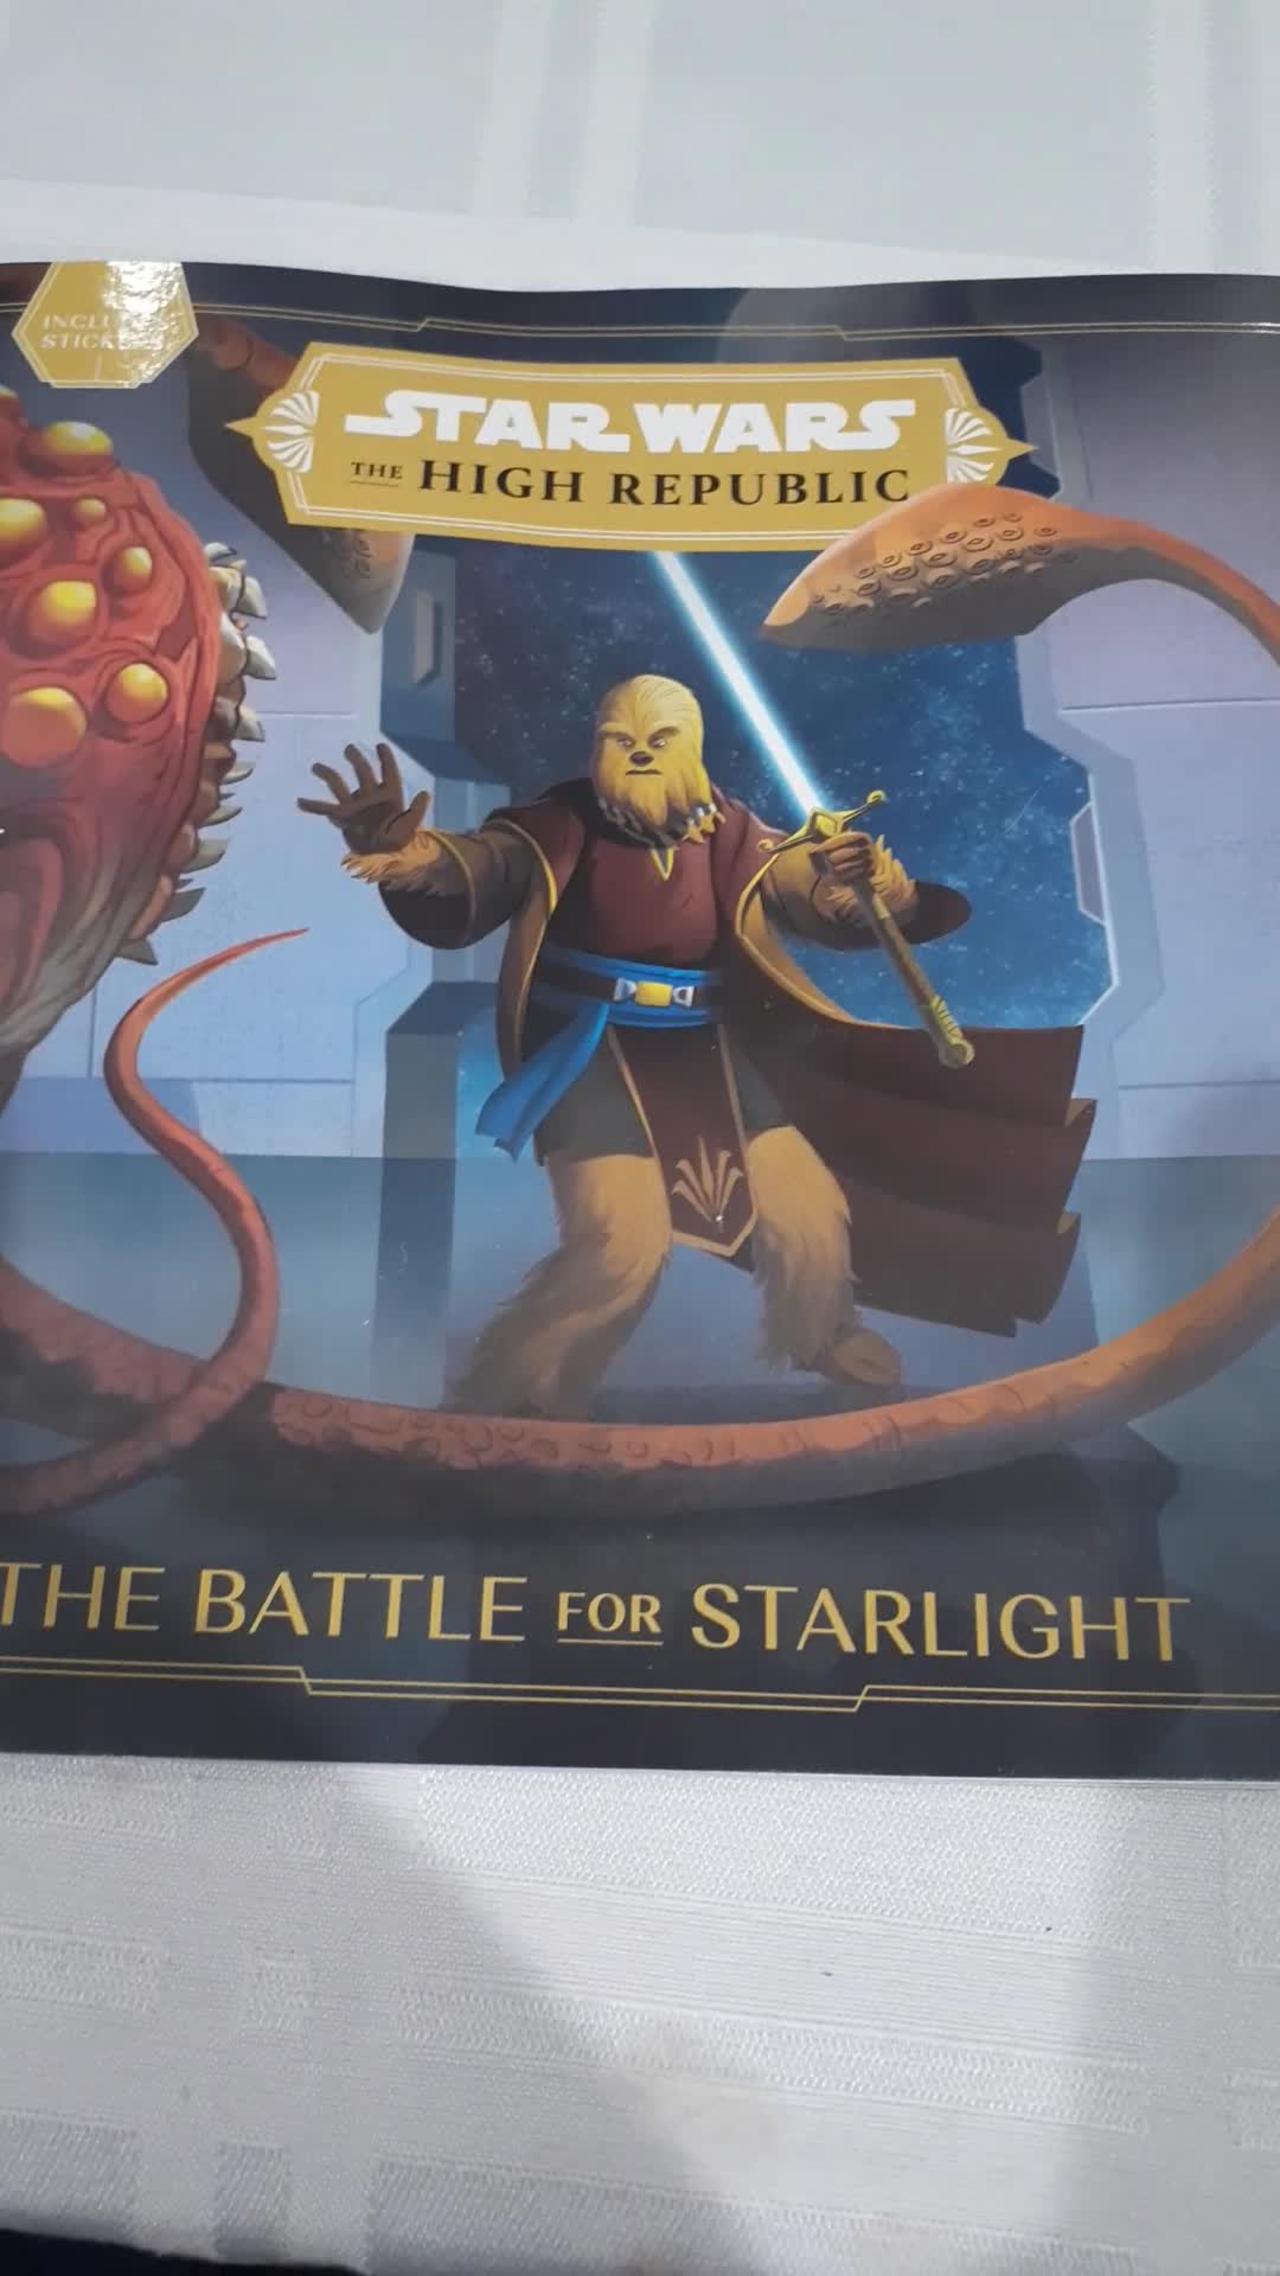 STAR WARS THE HIGH REPUBLIC THE BATTLE FOR STARLIGHT REVIEW